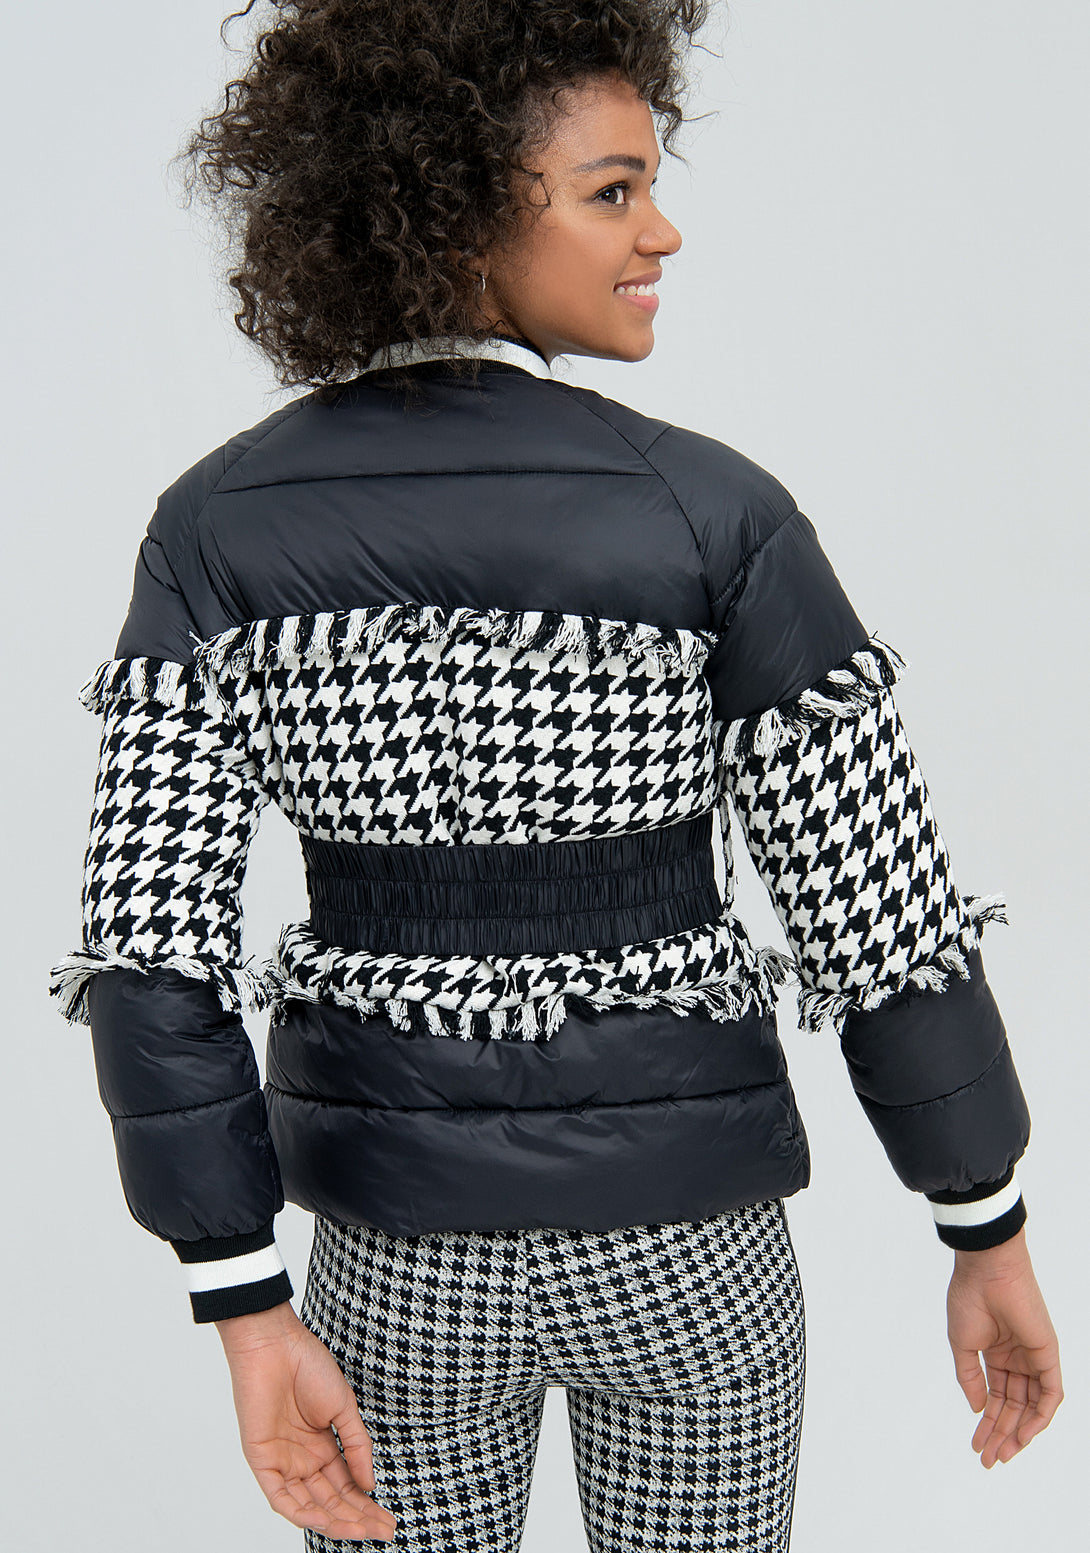 Padded jacket regular fit made with mixed fabric